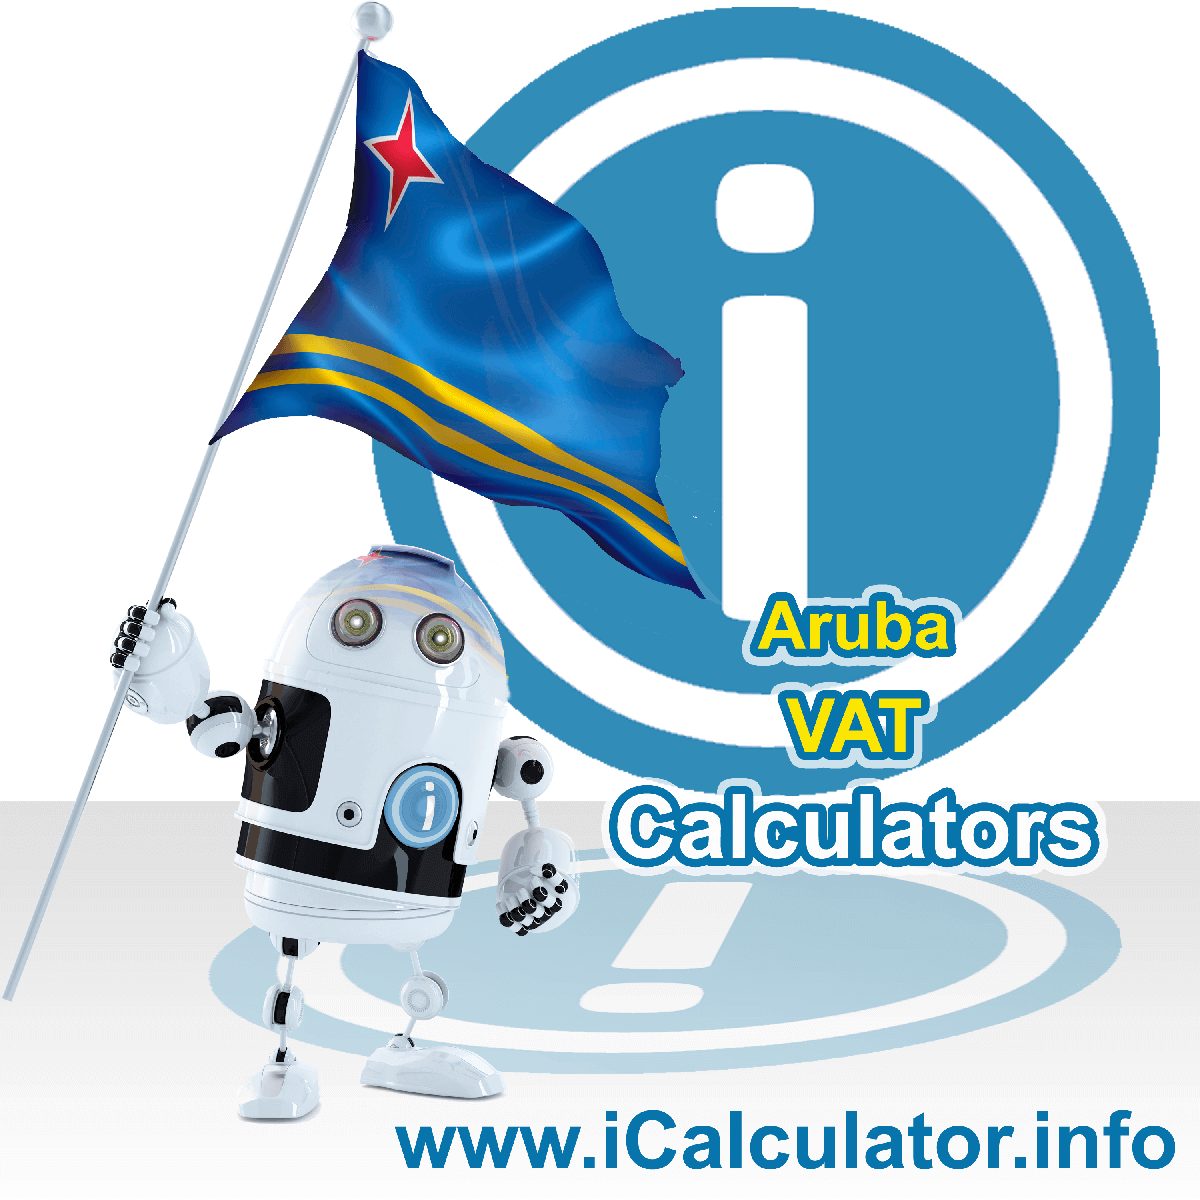 Aruba VAT Calculator. This image shows the Aruba flag and information relating to the VAT formula used for calculating Value Added Tax in Aruba using the Aruba VAT Calculator in 2023